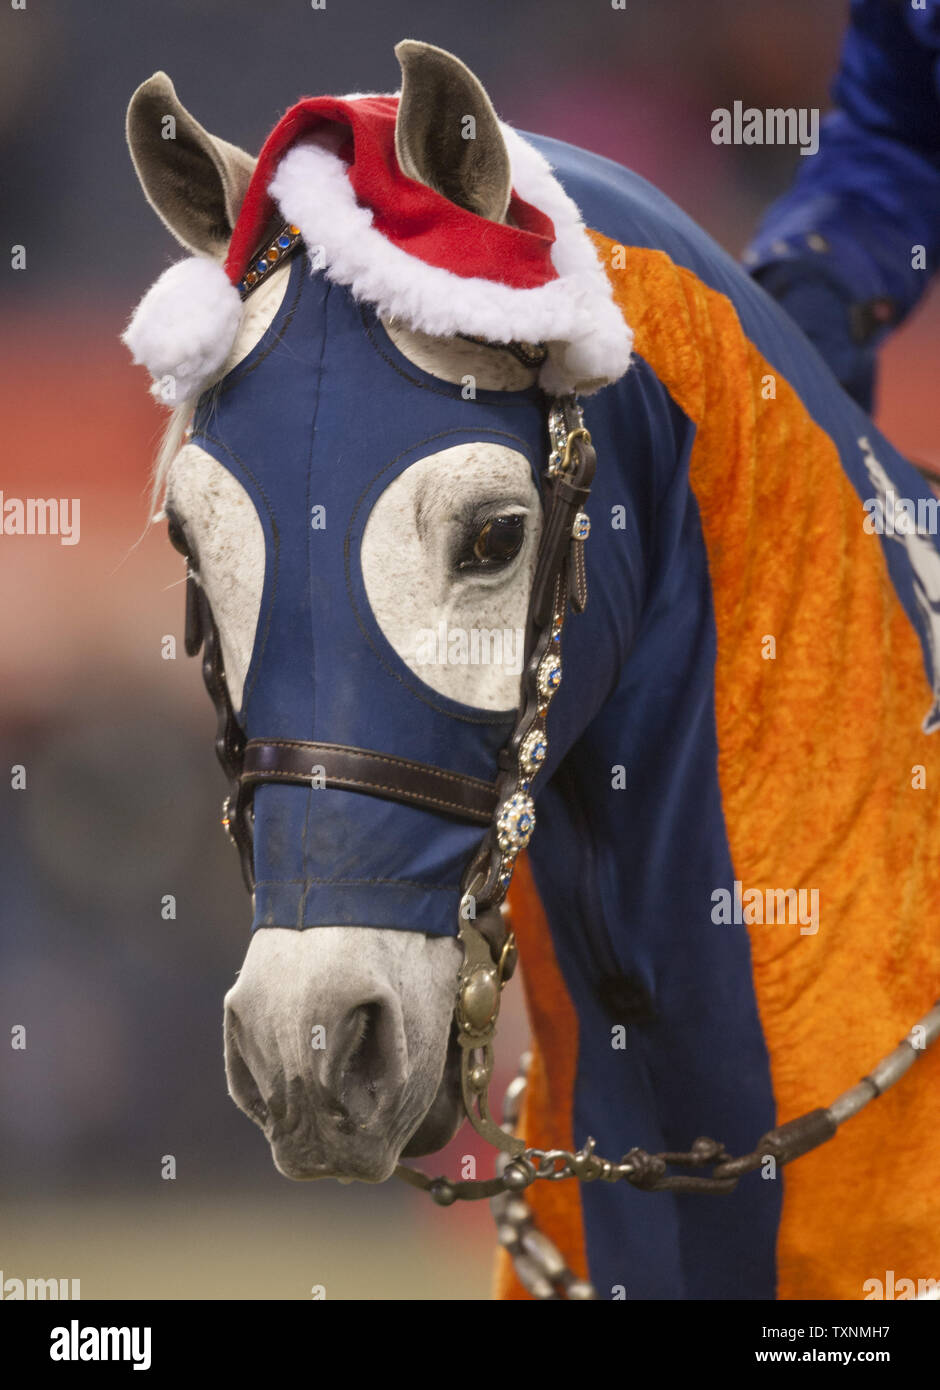 Denver Broncos team mascot Arabian horse Thunder wears a Santa hat during the game against the San Diego Chargers at Sports Authority Field at Mile High in Denver on December 12, 2013.   UPI/Gary C. Caskey Stock Photo